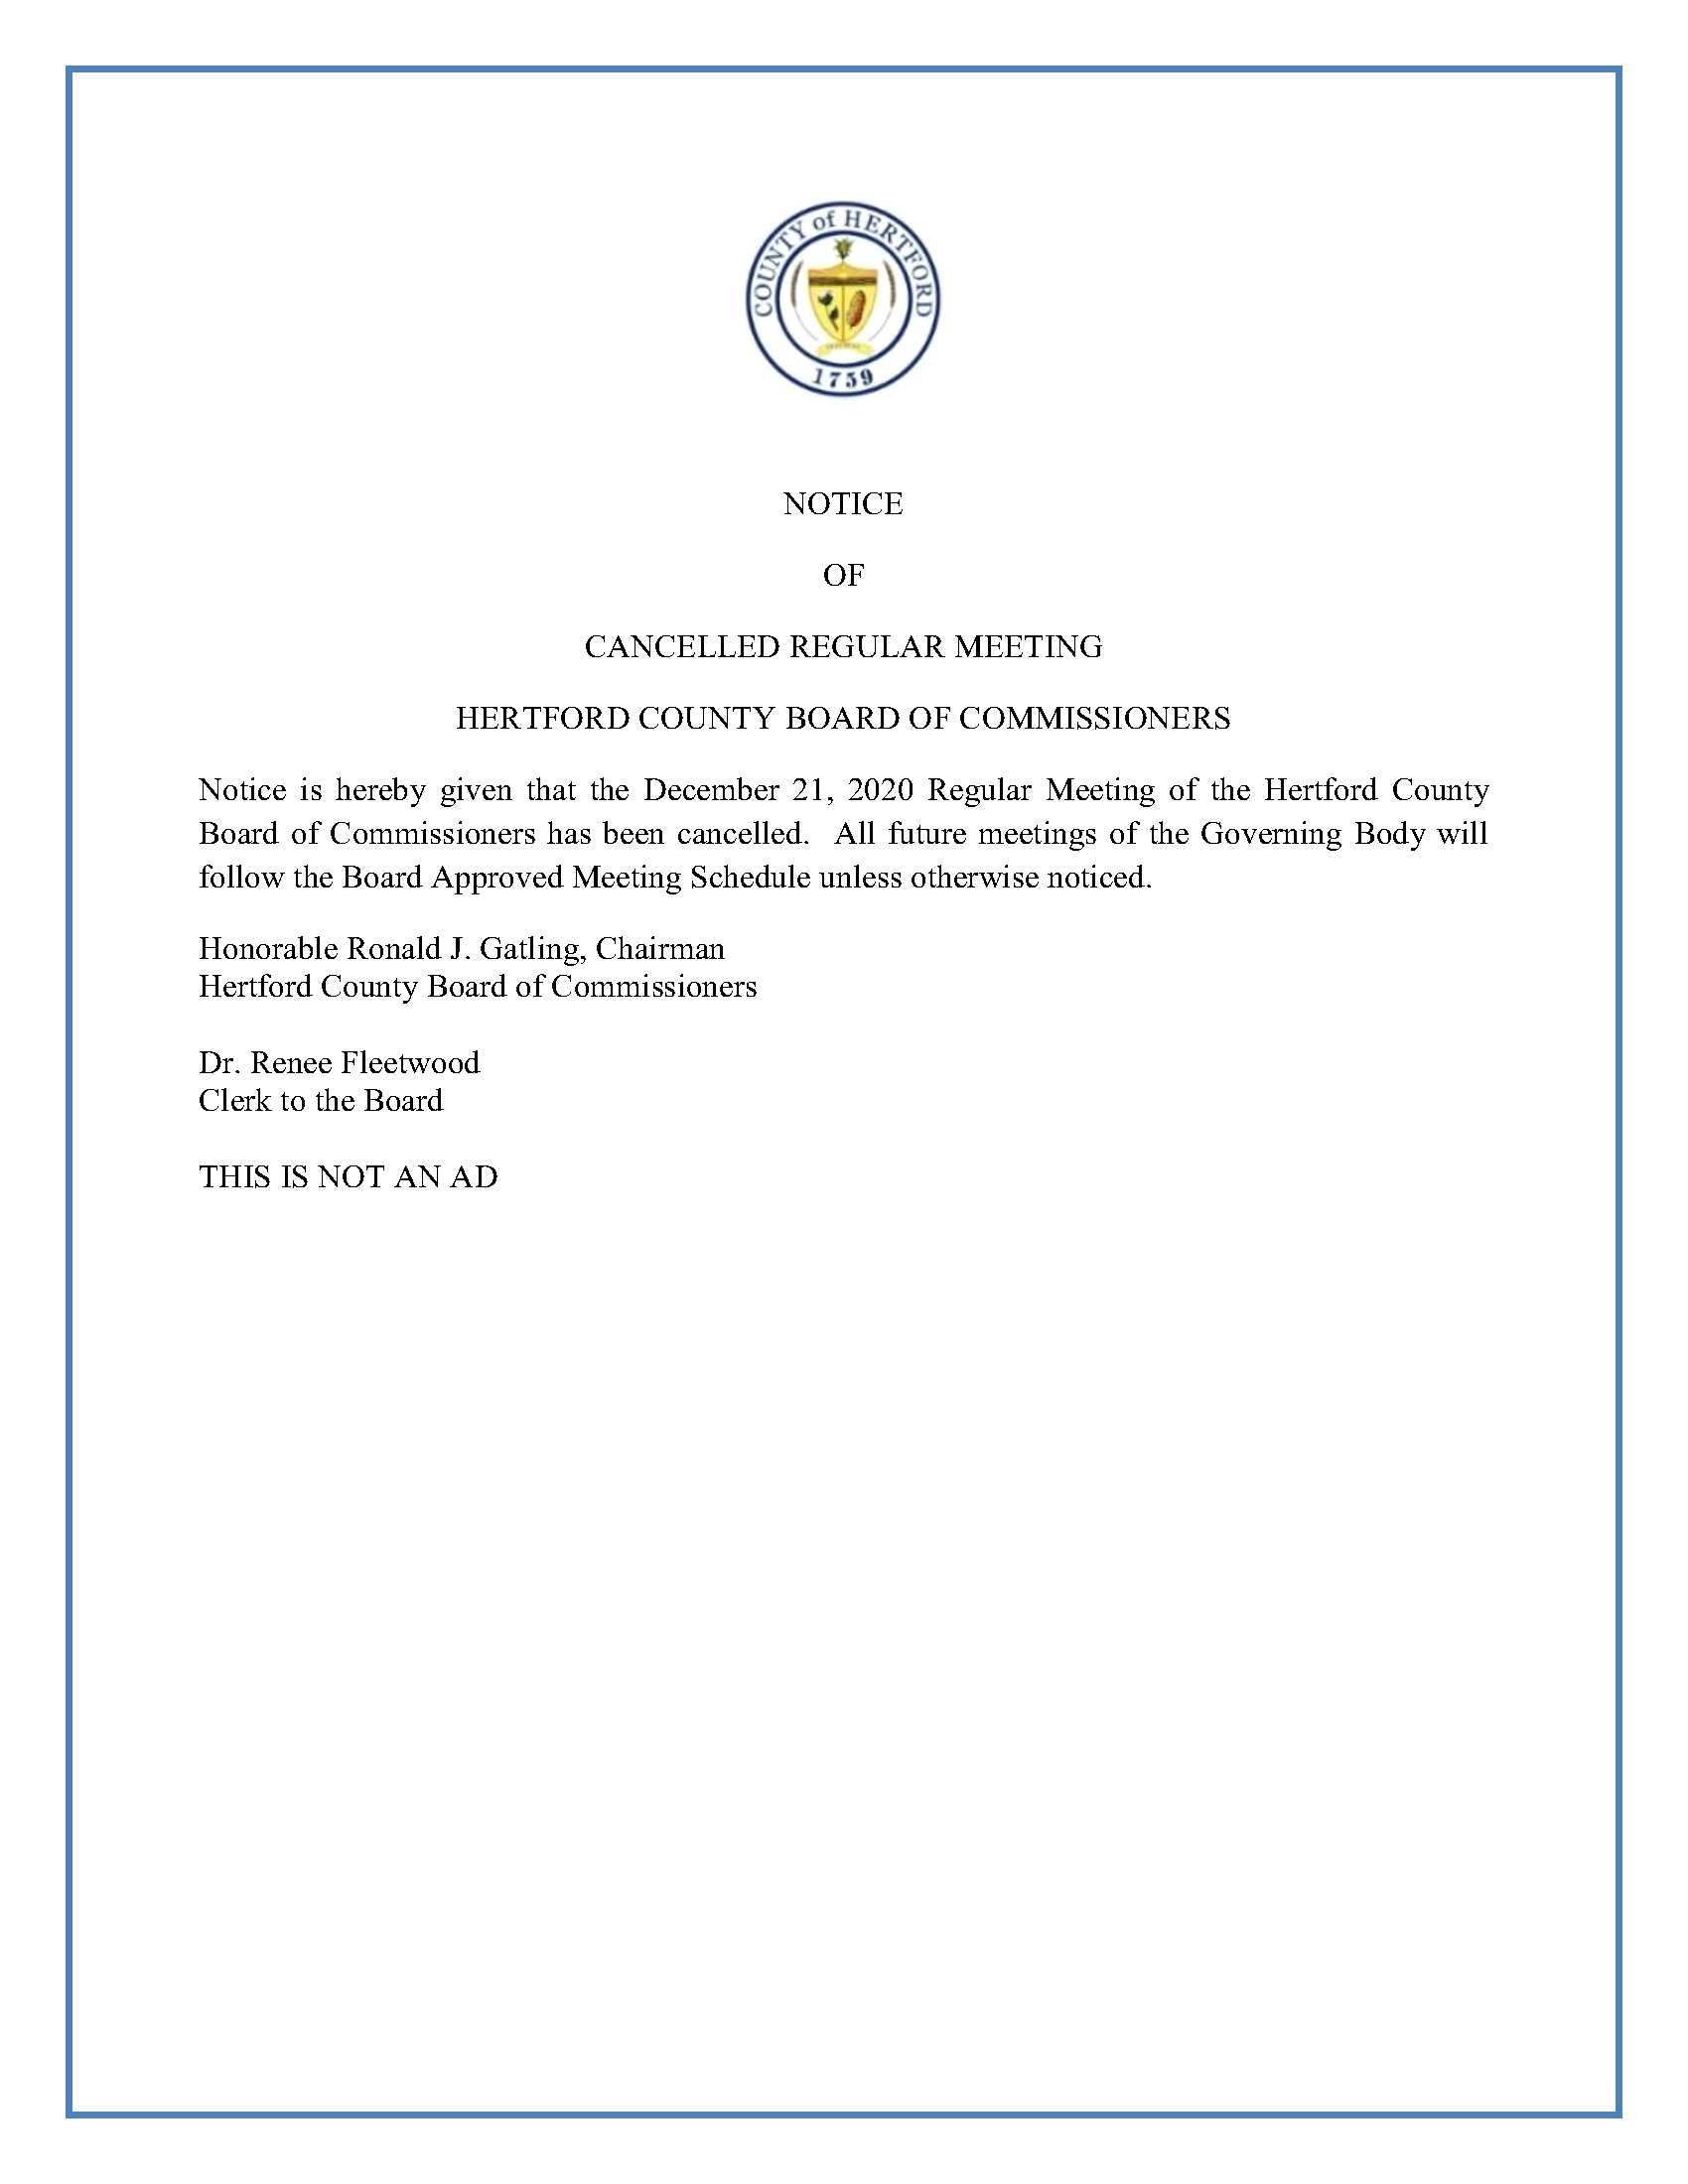 NOTICE of Cancelled Meeting_12212020